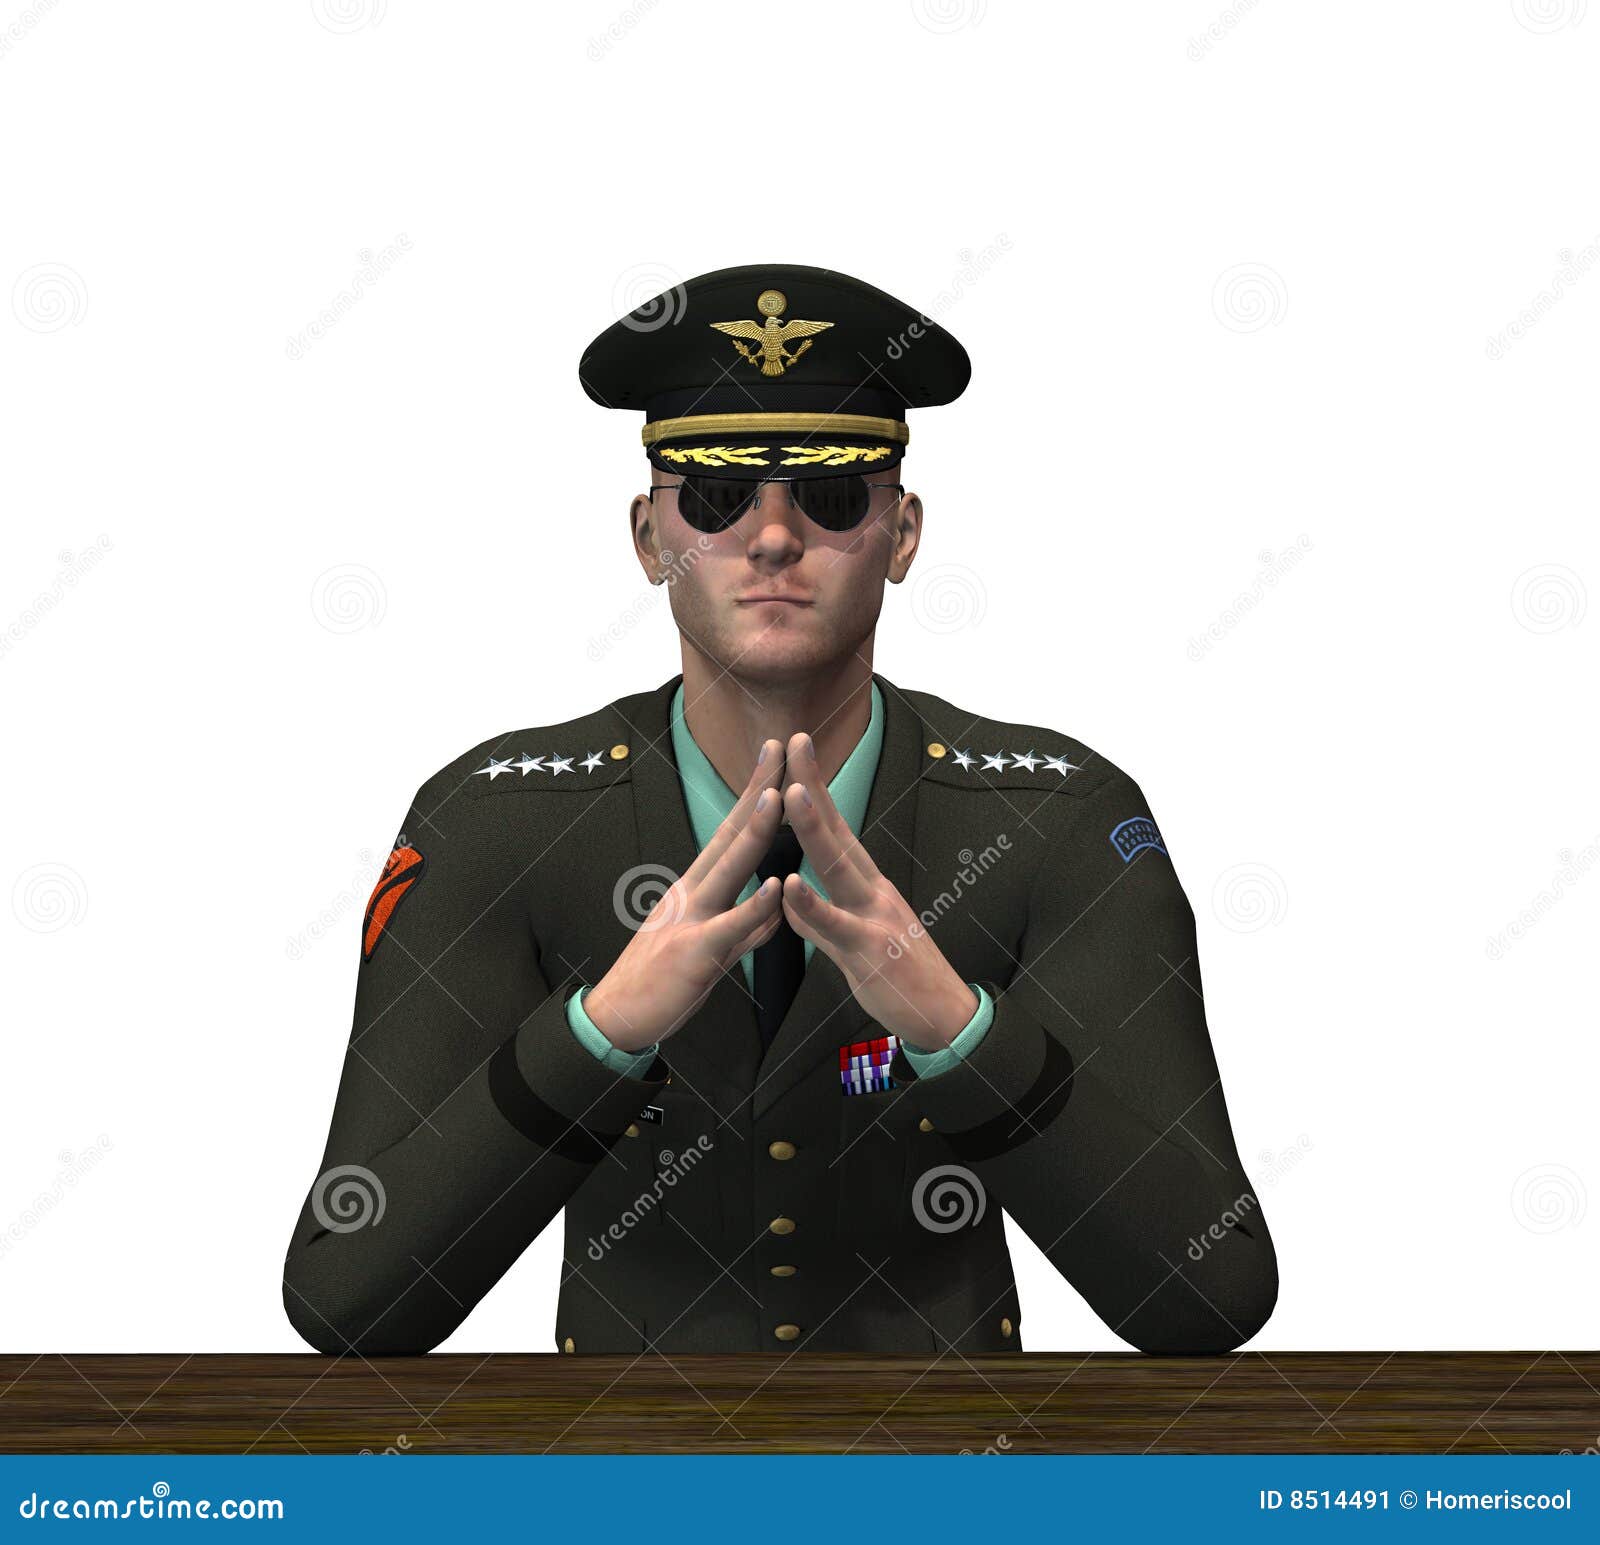 military officer clipart - photo #45